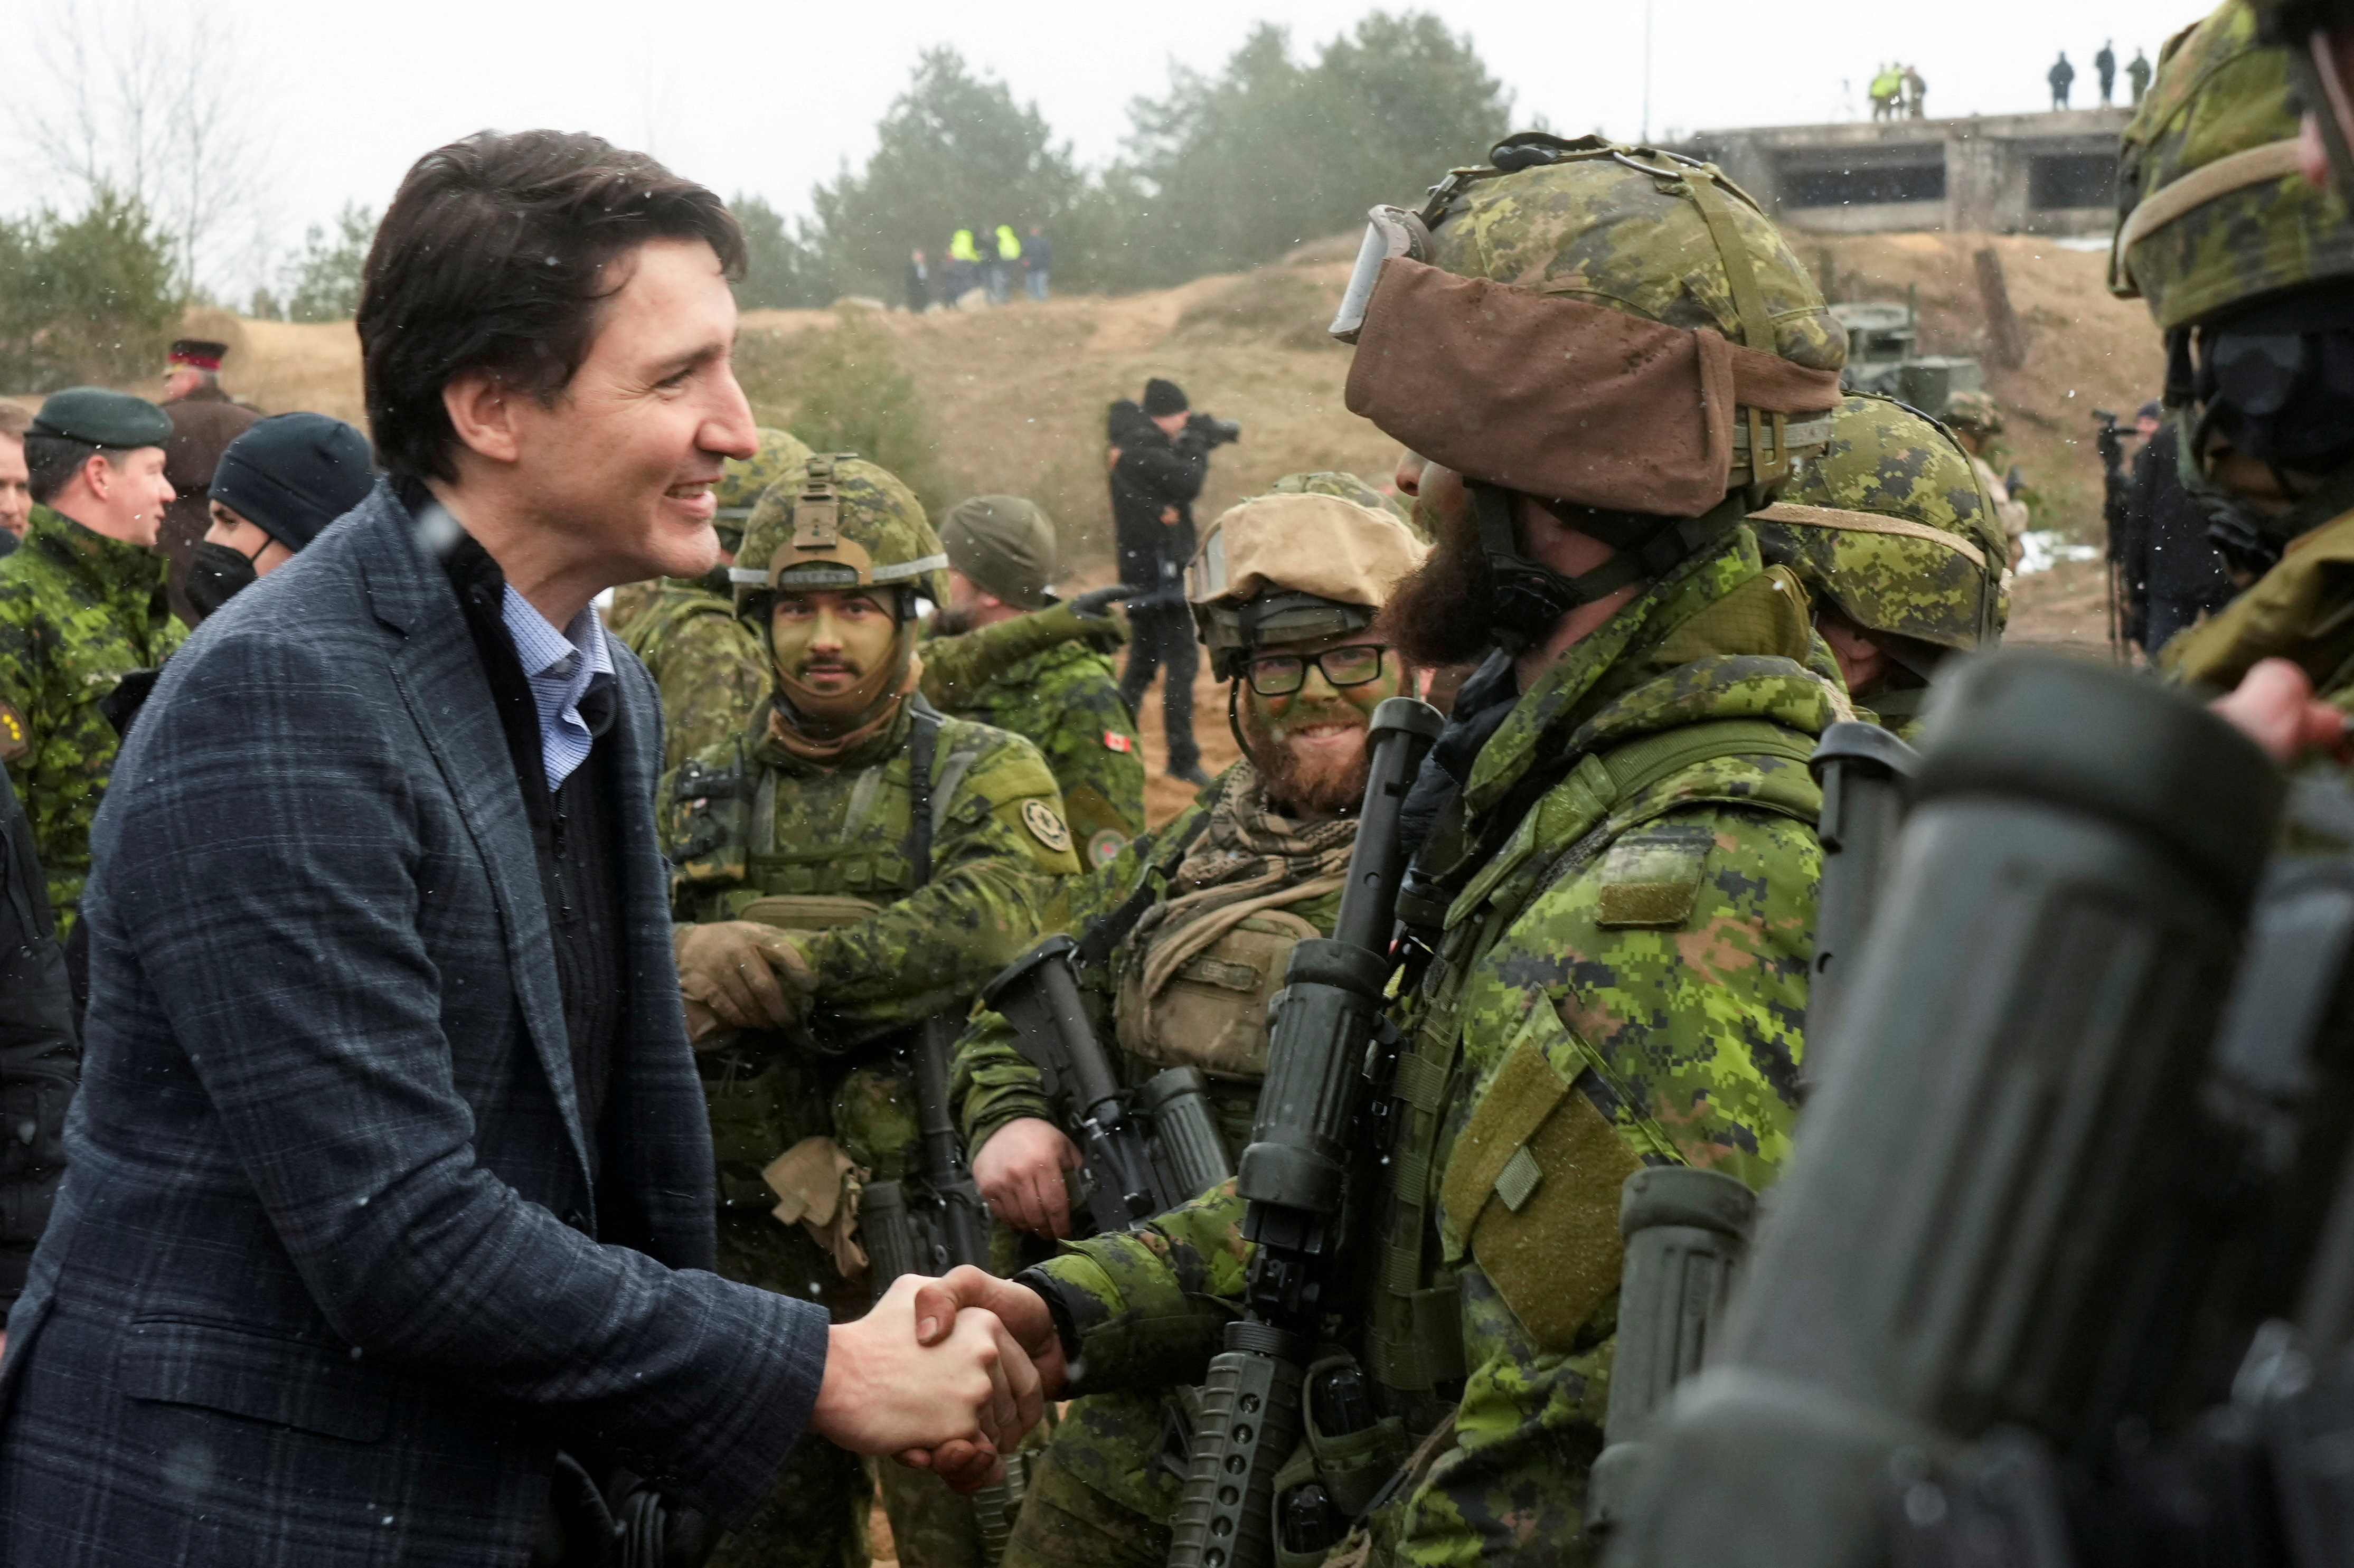 Canadian Prime Minister Justin Trudeau visited members of Canadian troops at the Adazi military base